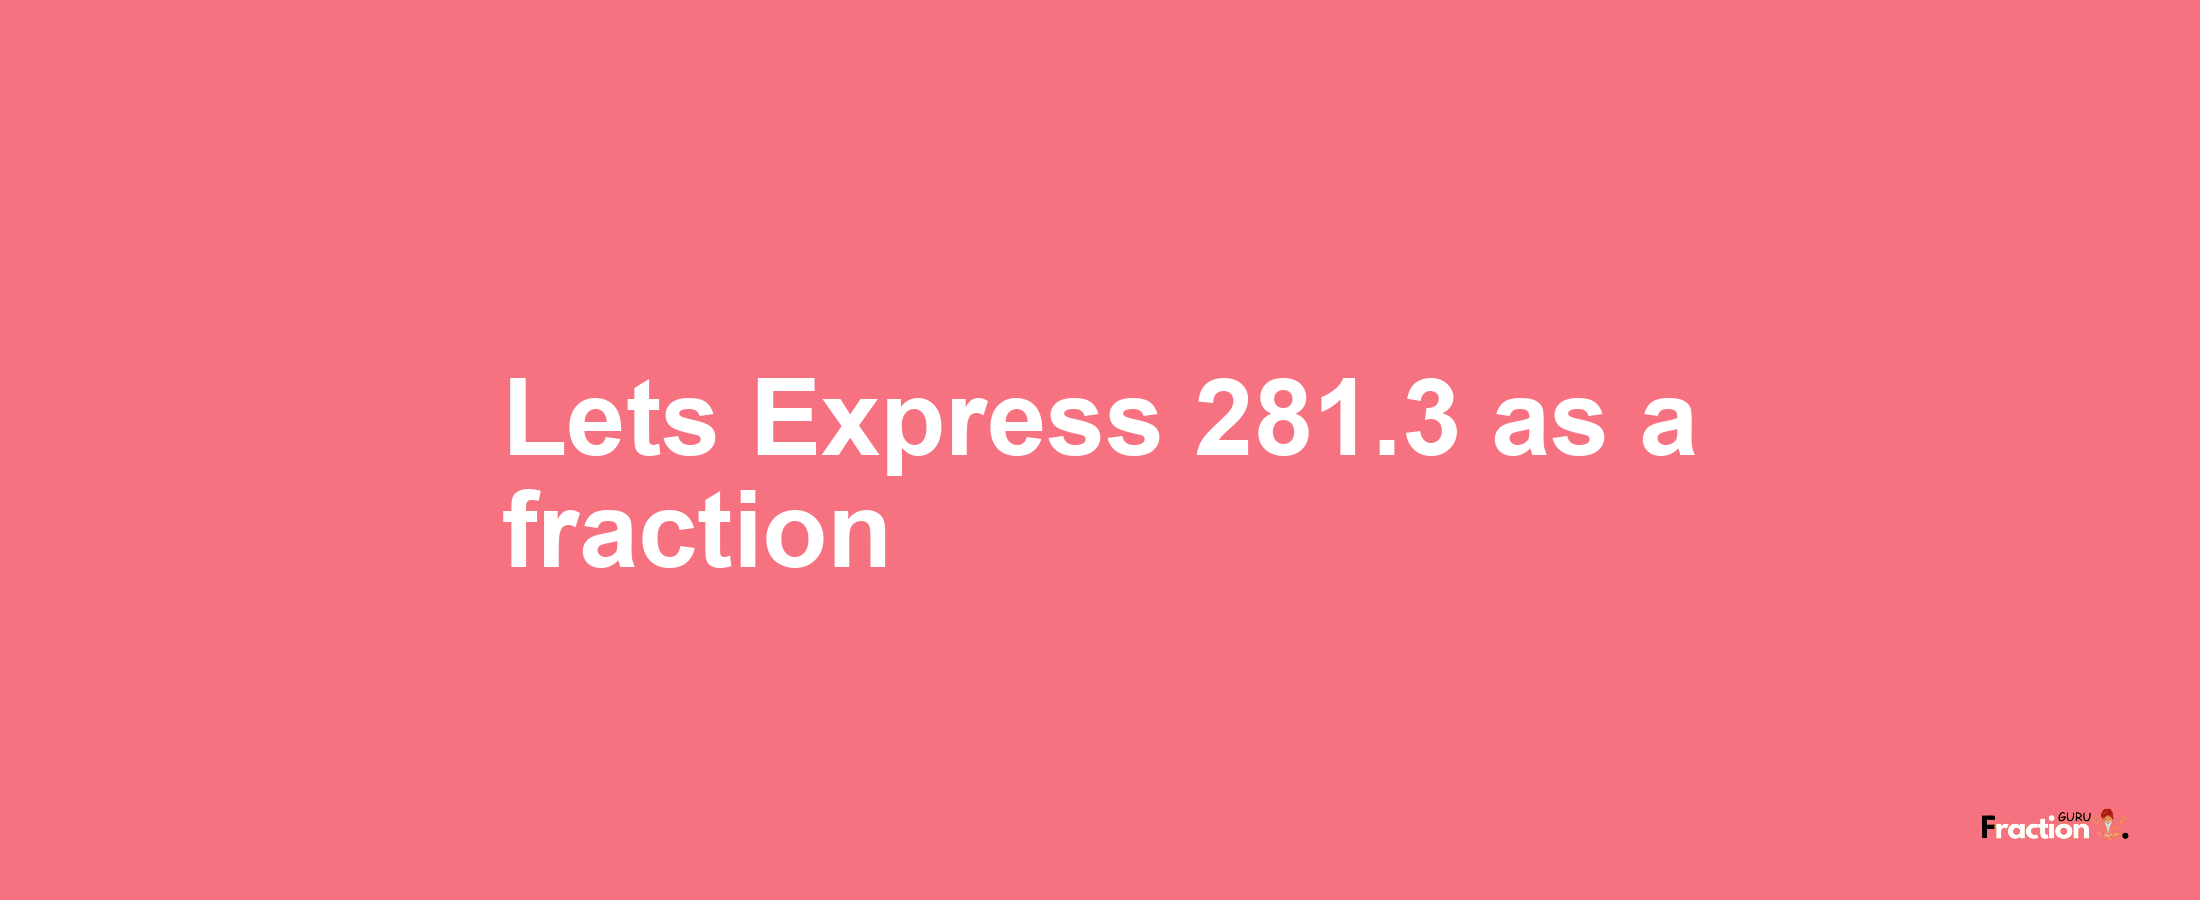 Lets Express 281.3 as afraction